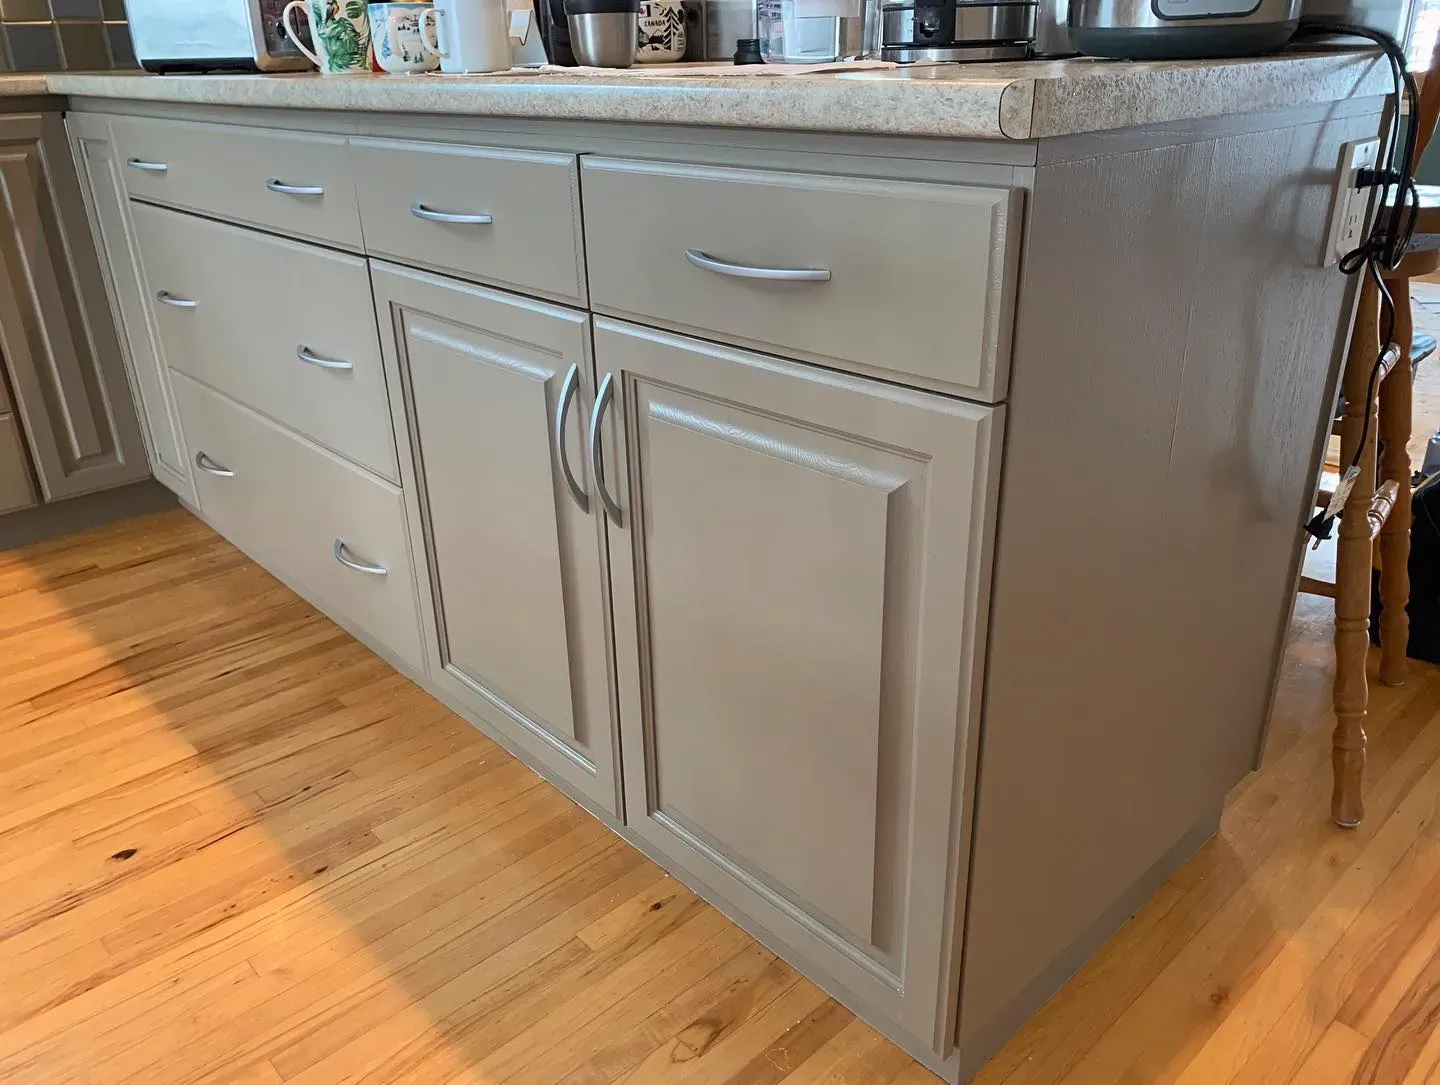 Kingsport Gray kitchen cabinets paint review